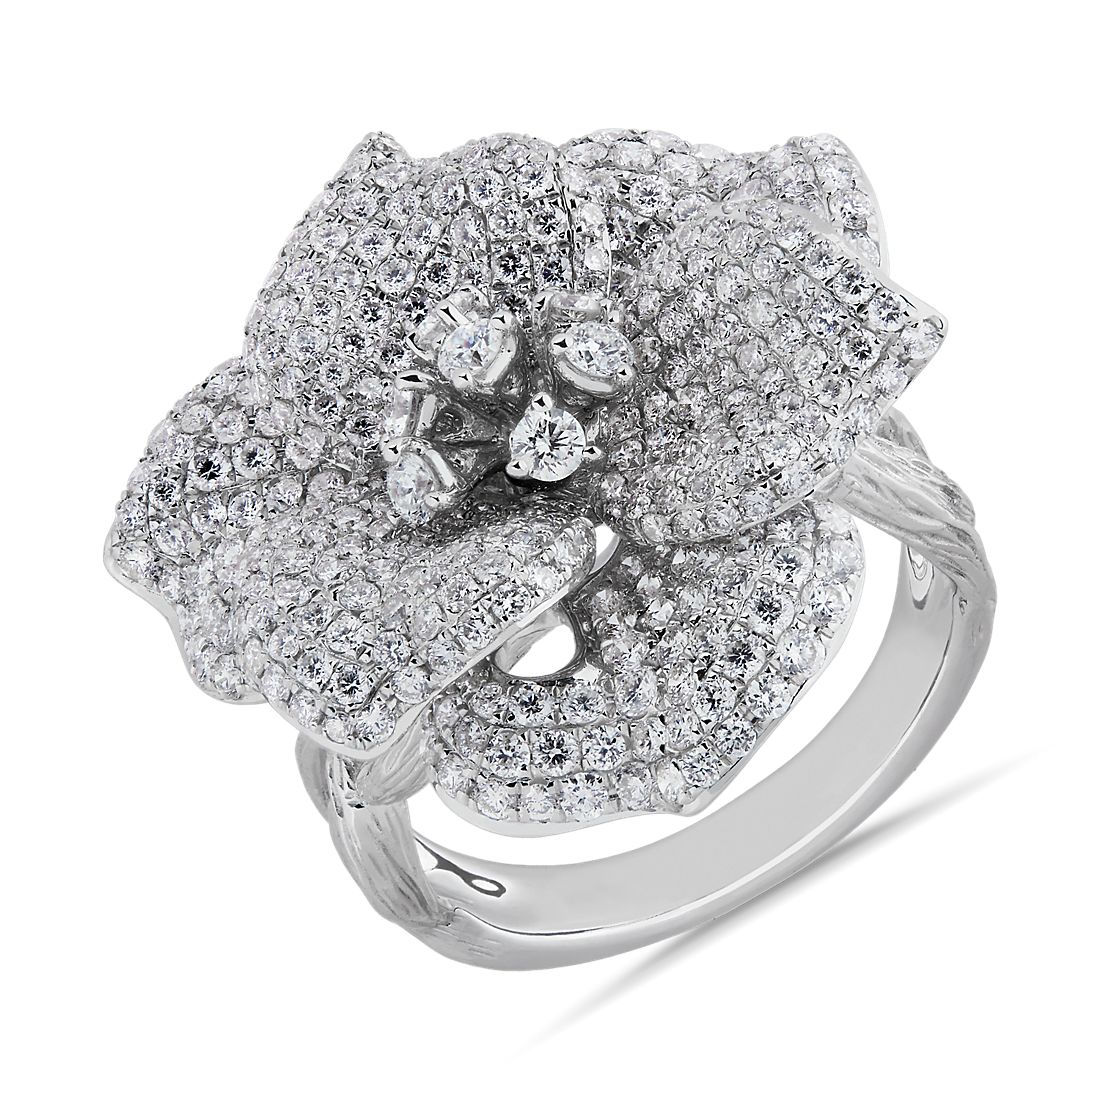 Diamond cluster ring in the shape of a flower.